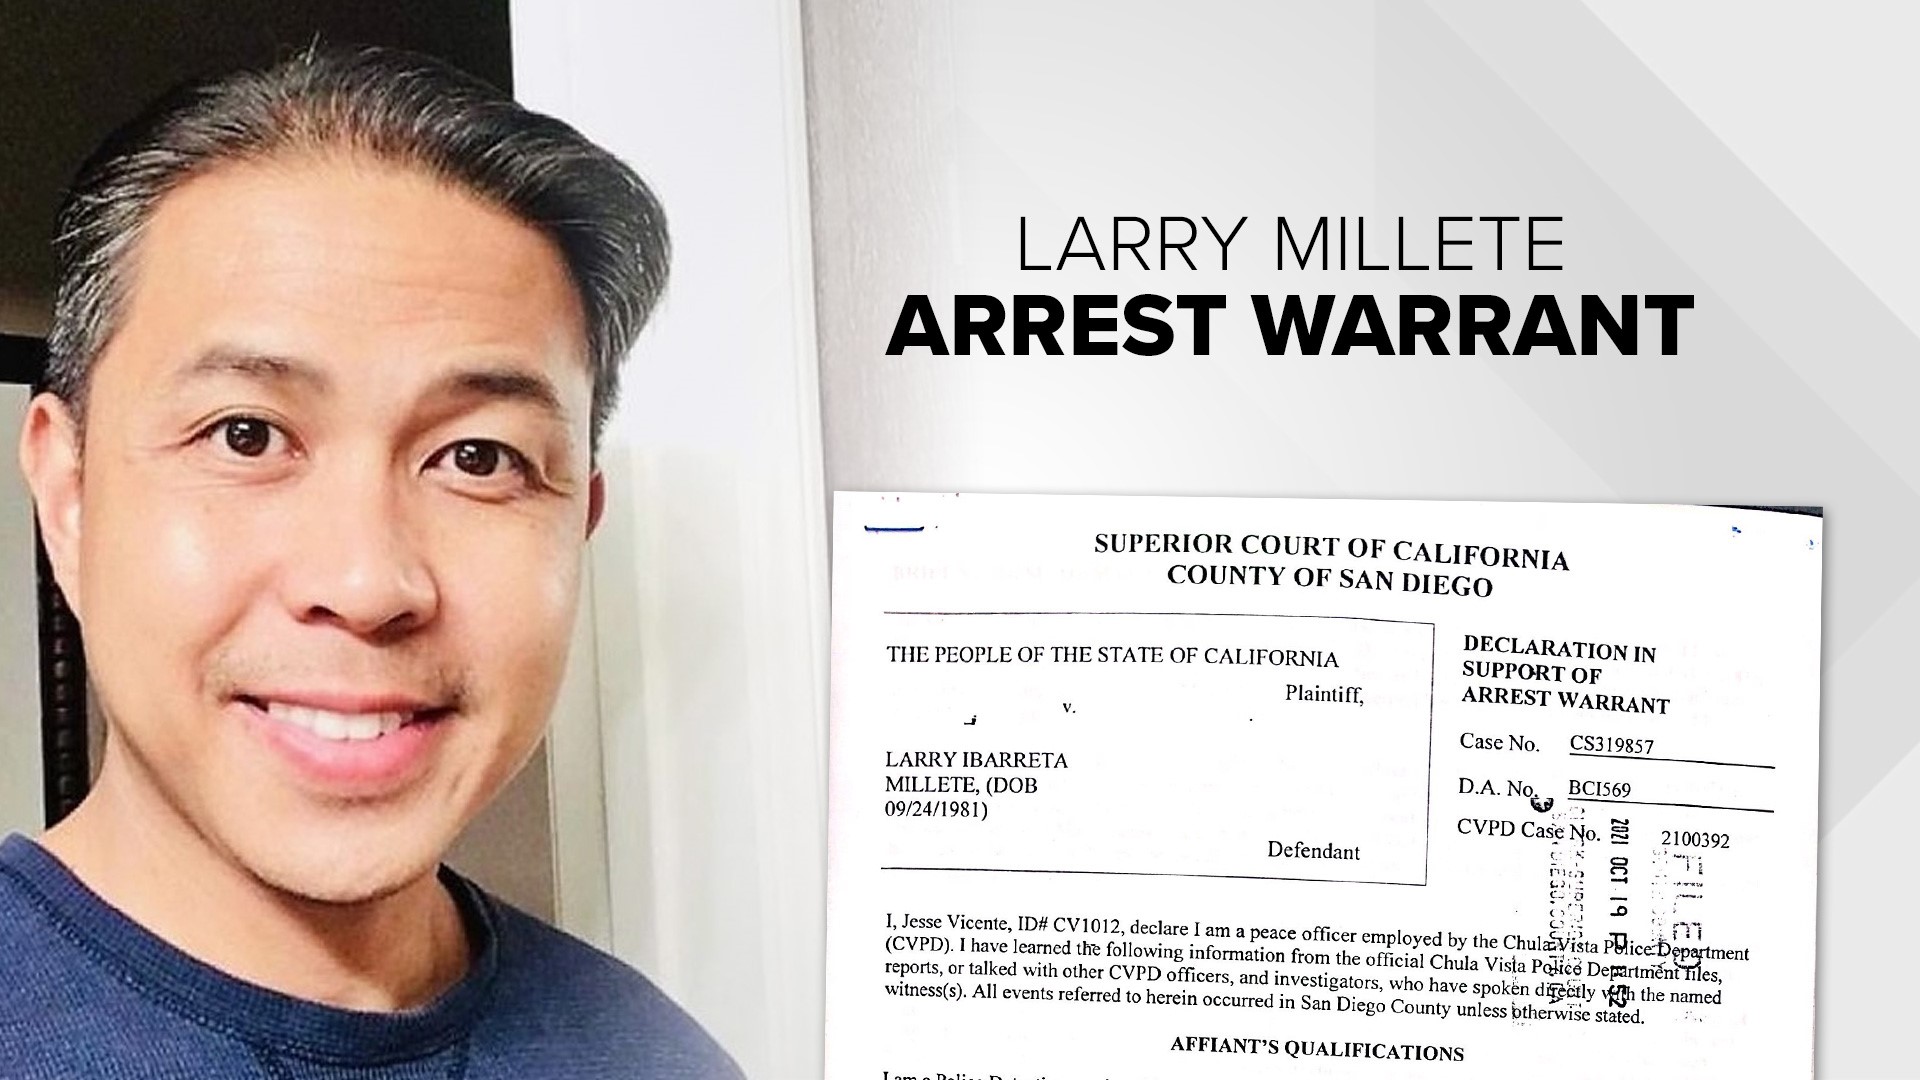 How will this case be prosecuted with no body and no murder weapon? Those are just some of the questions on the minds of viewers after Larry Millete's arrest .